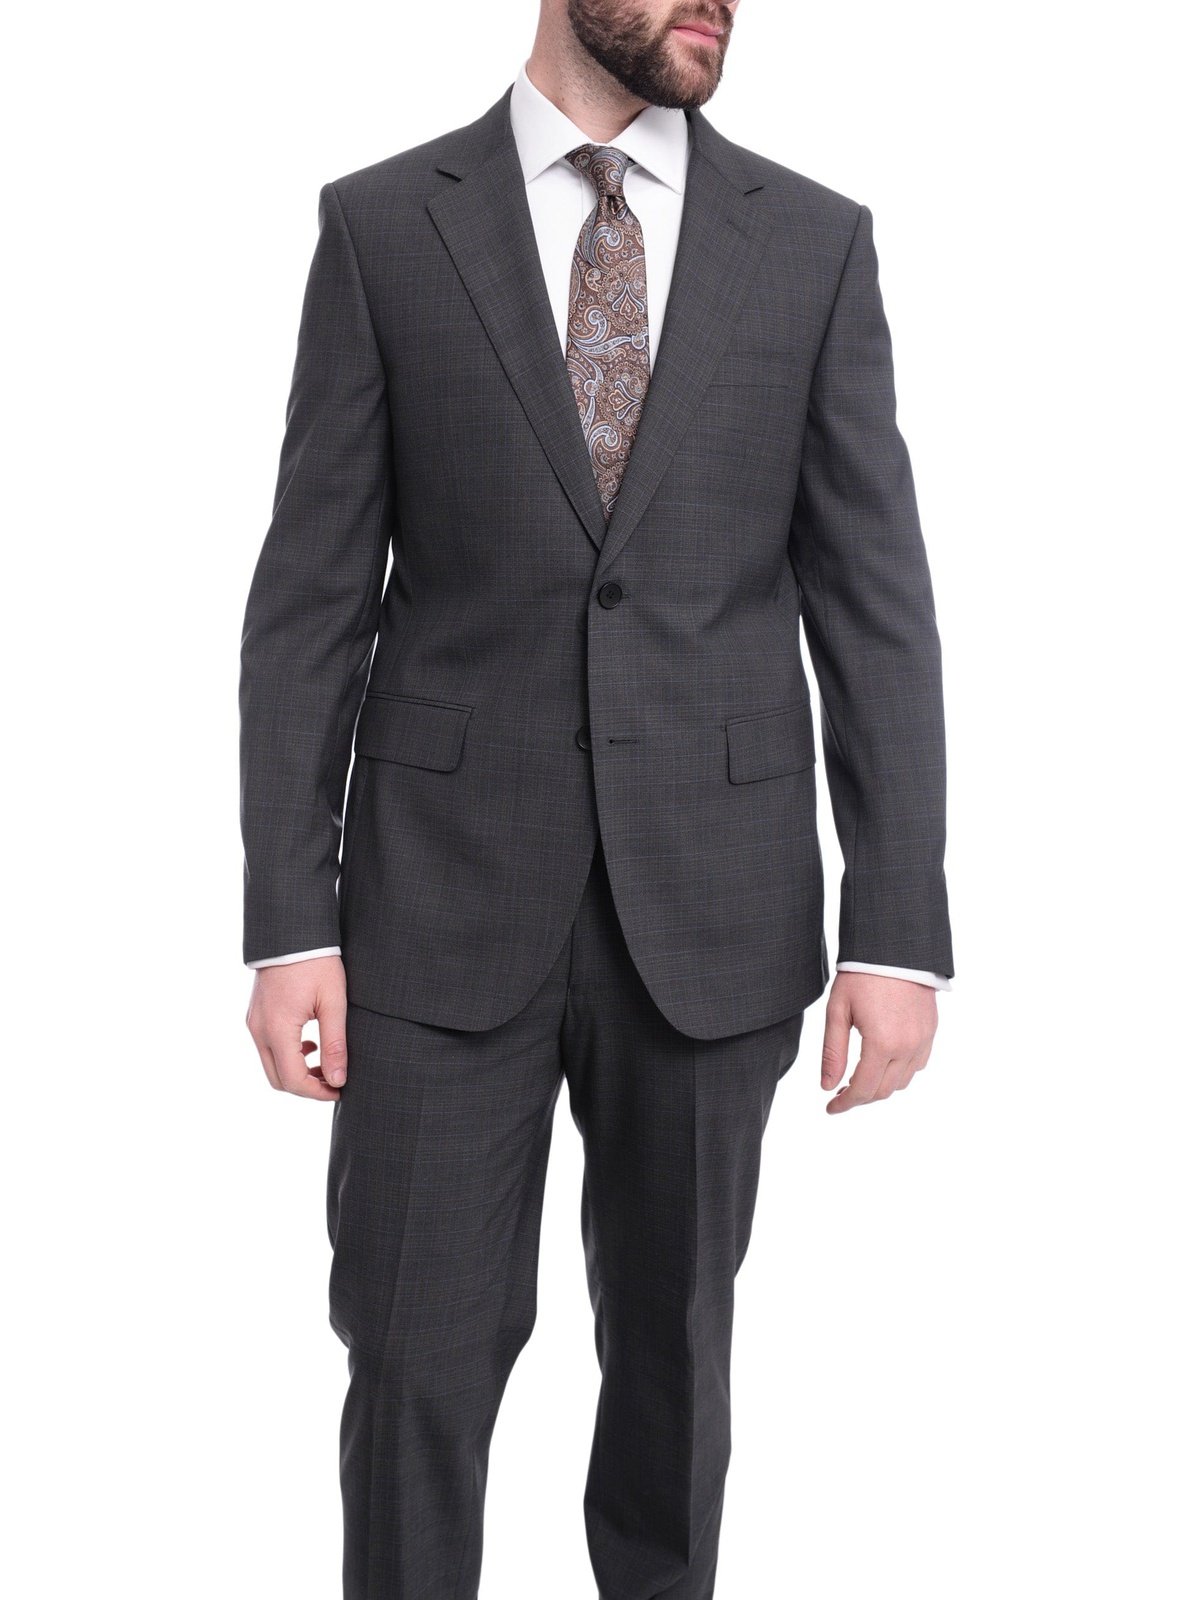 Napoli TWO PIECE SUITS Napoli Slim Fit Medium Gray & Blue Plaid Two Button Half Canvassed Wool Suit